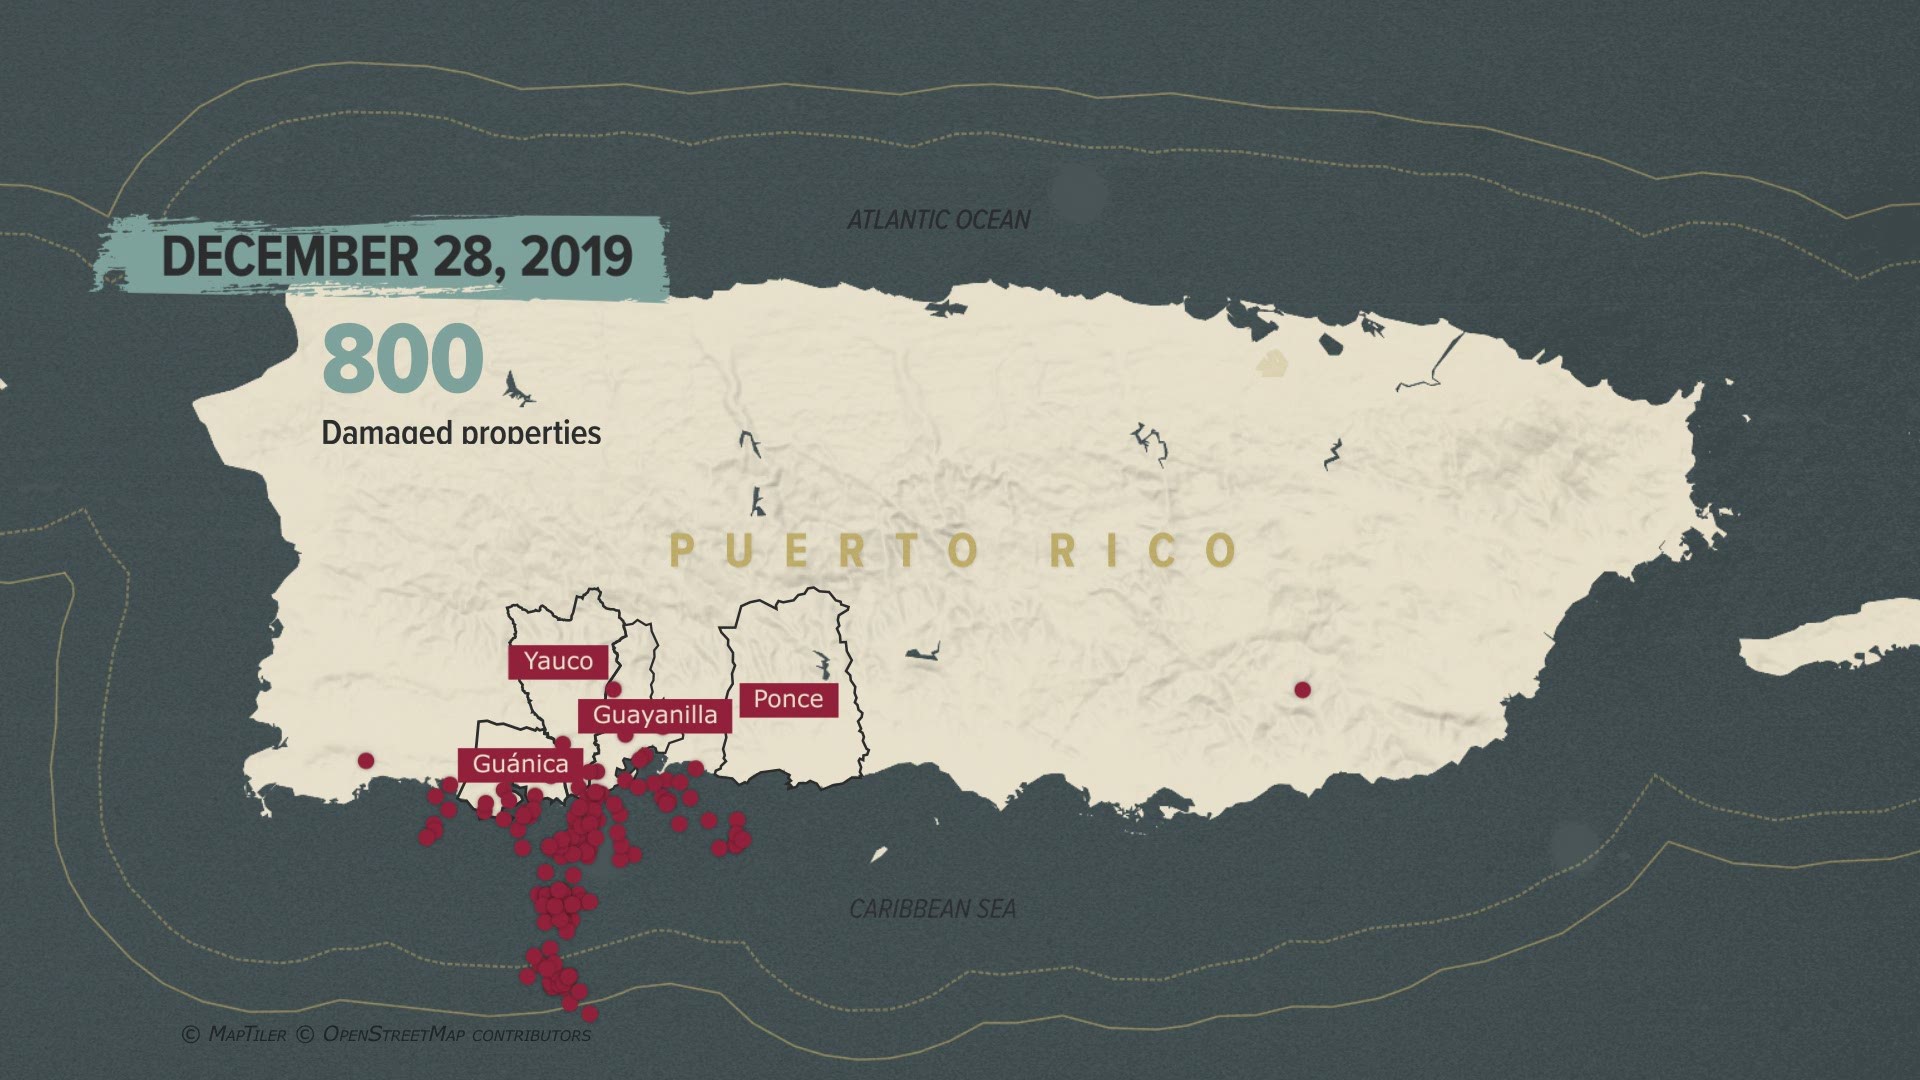 Since December 28, hundreds and hundreds of earthquakes have hit the island.